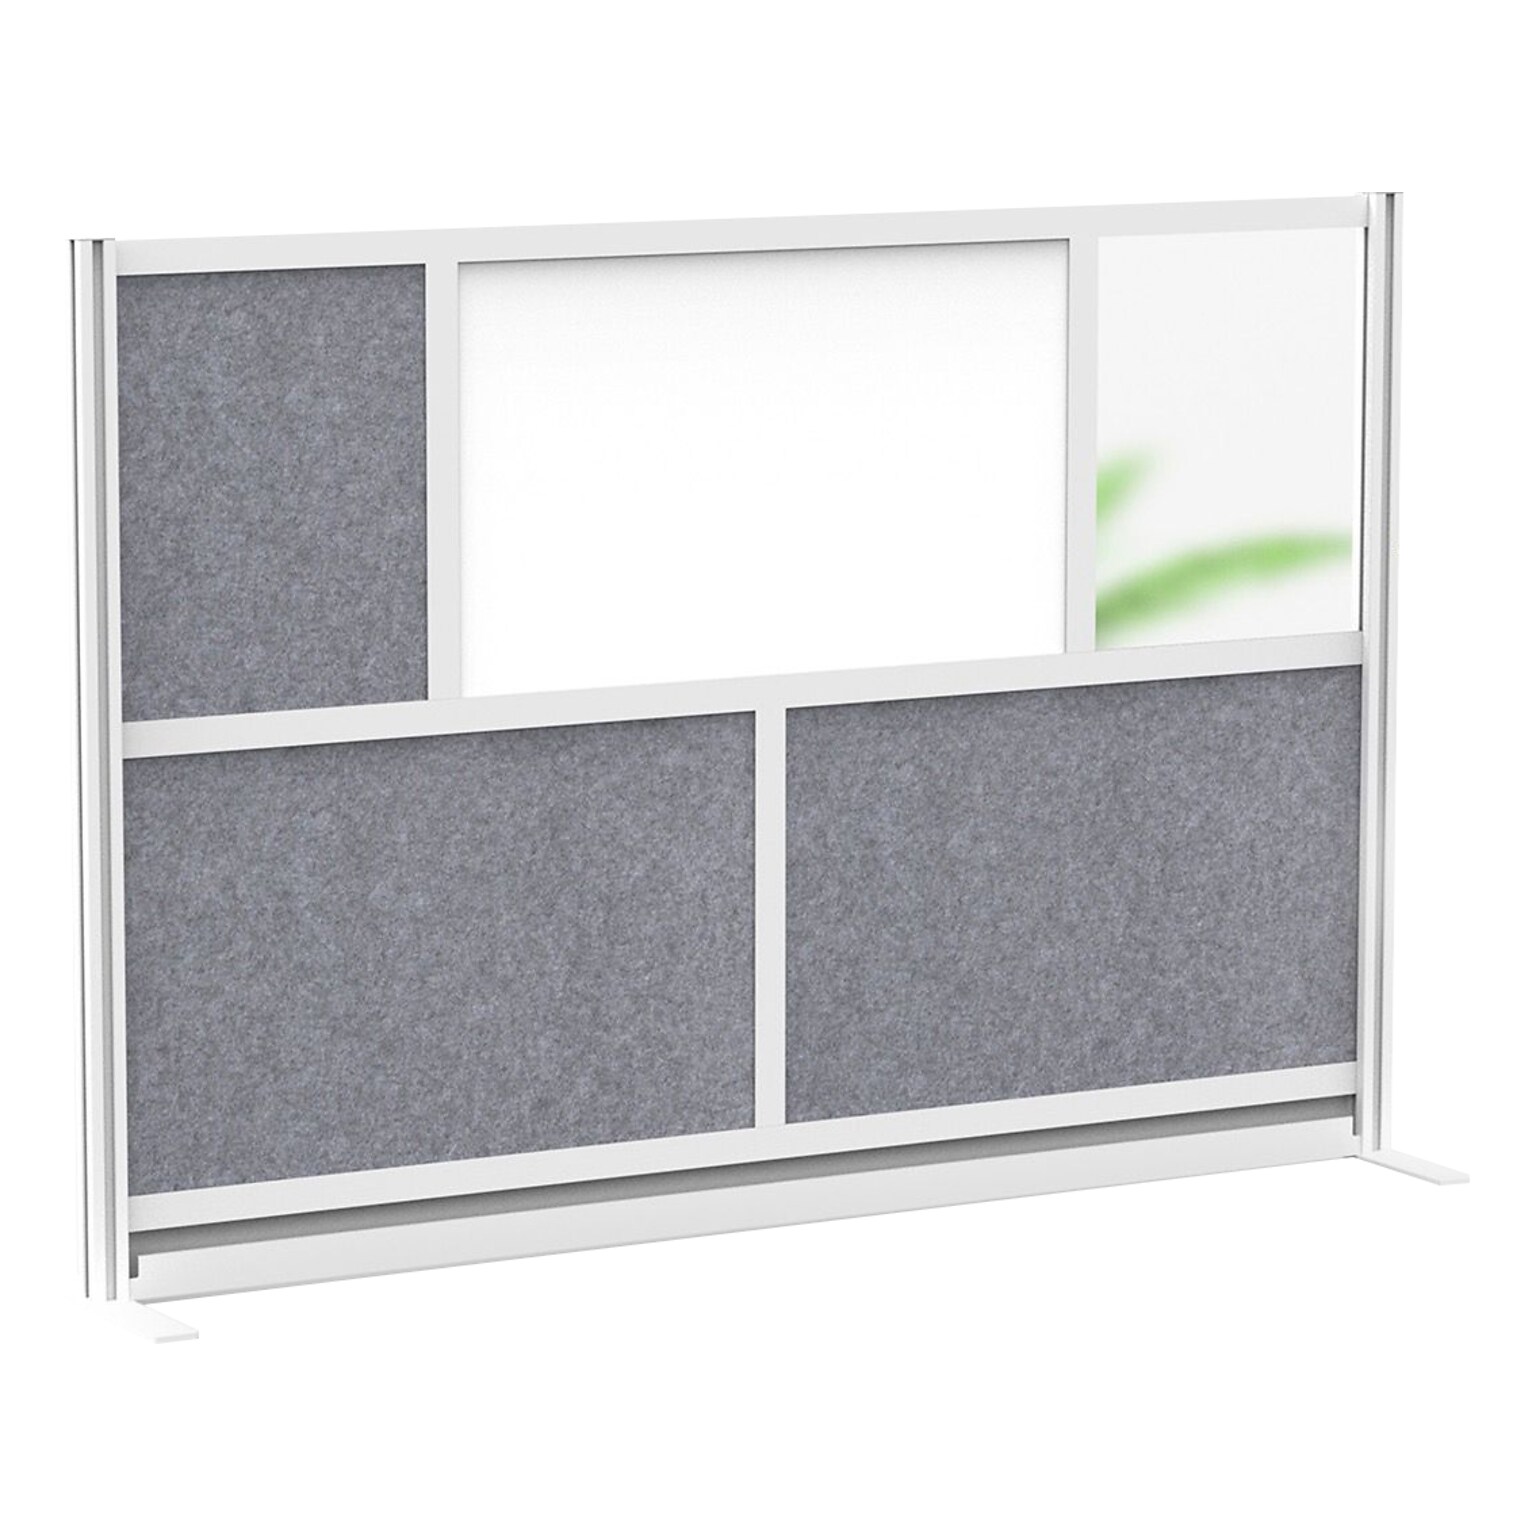 Luxor Workflow Series 5-Panel Freestanding Modular Room Divider System Starter Wall with Whiteboard, 48H x 70W, Gray/Silver